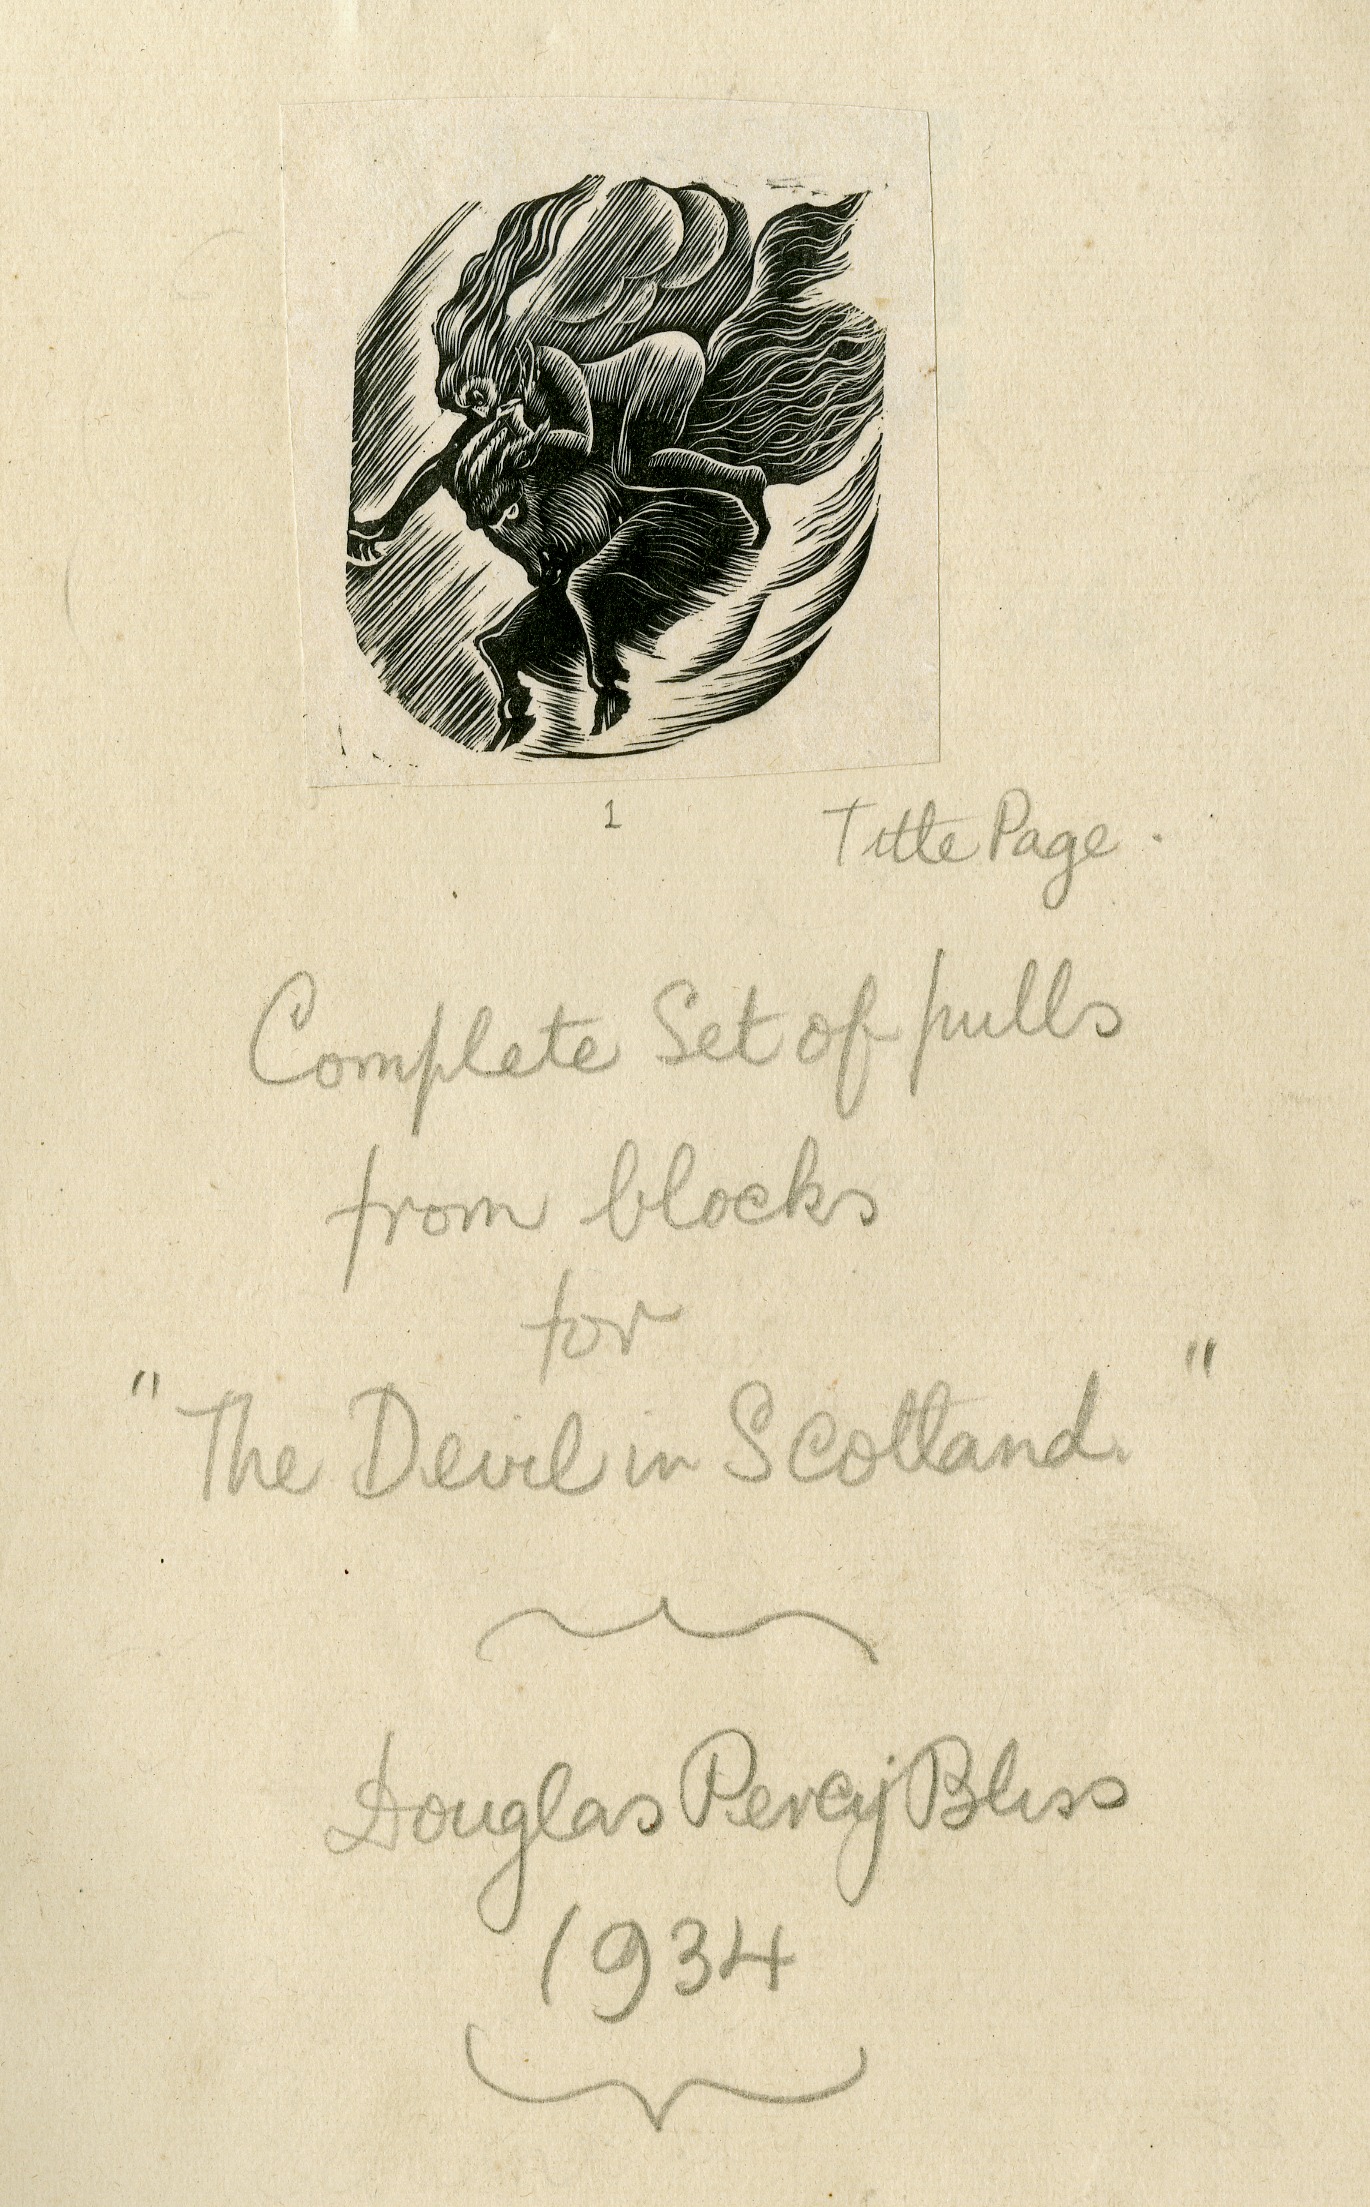 Title Page (from Album containing complete set of pulls from blocks for 'The Devil in Scotland' by Douglas Percy Bliss) (1934)